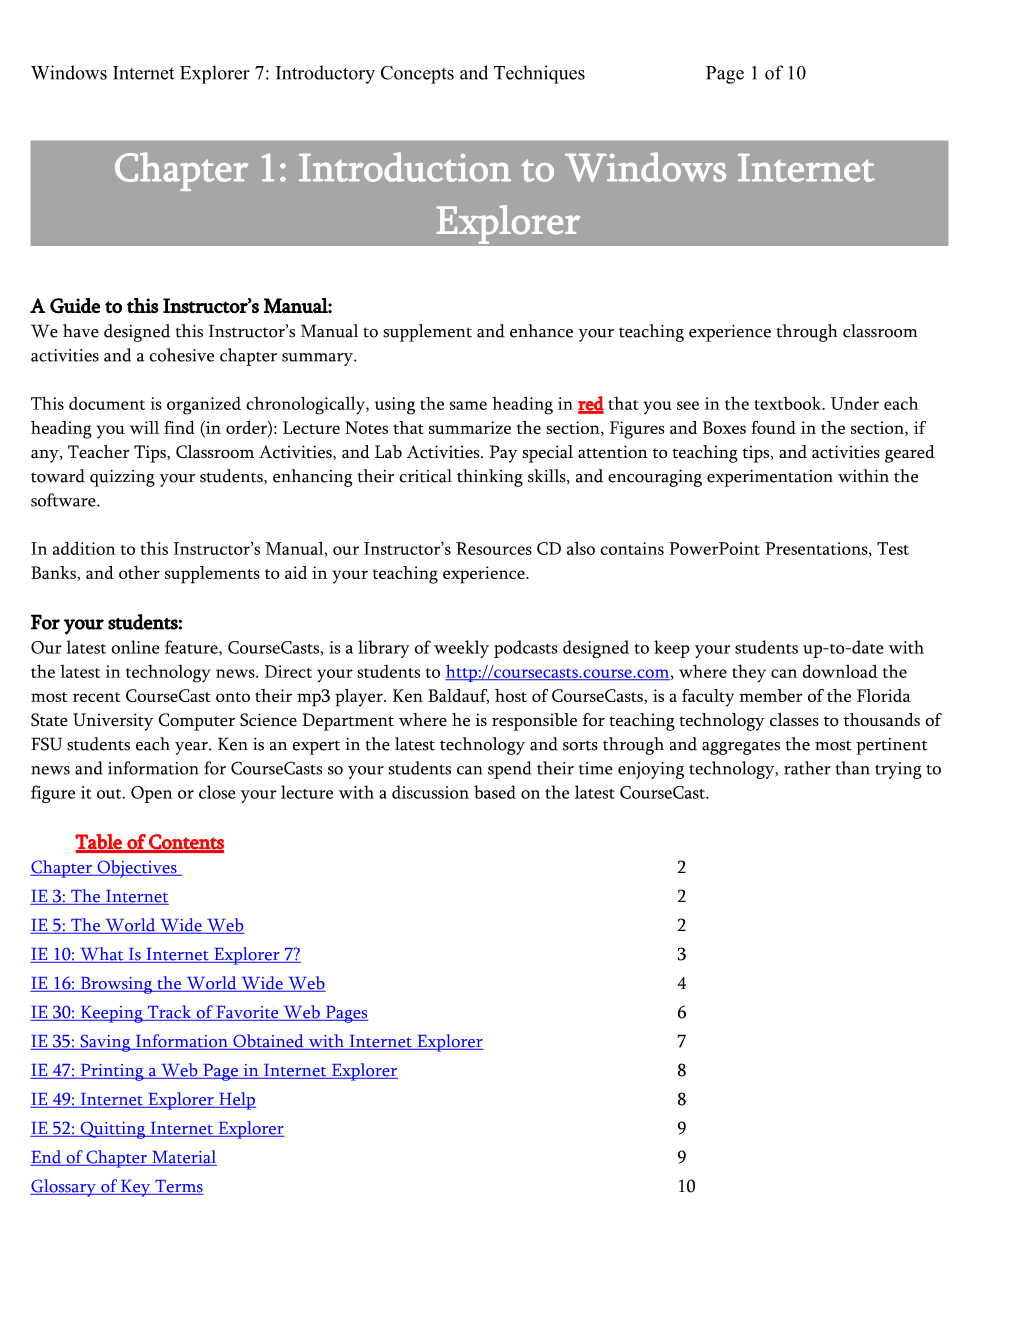 Chapter 1: Introduction to Windows Internet Explorer